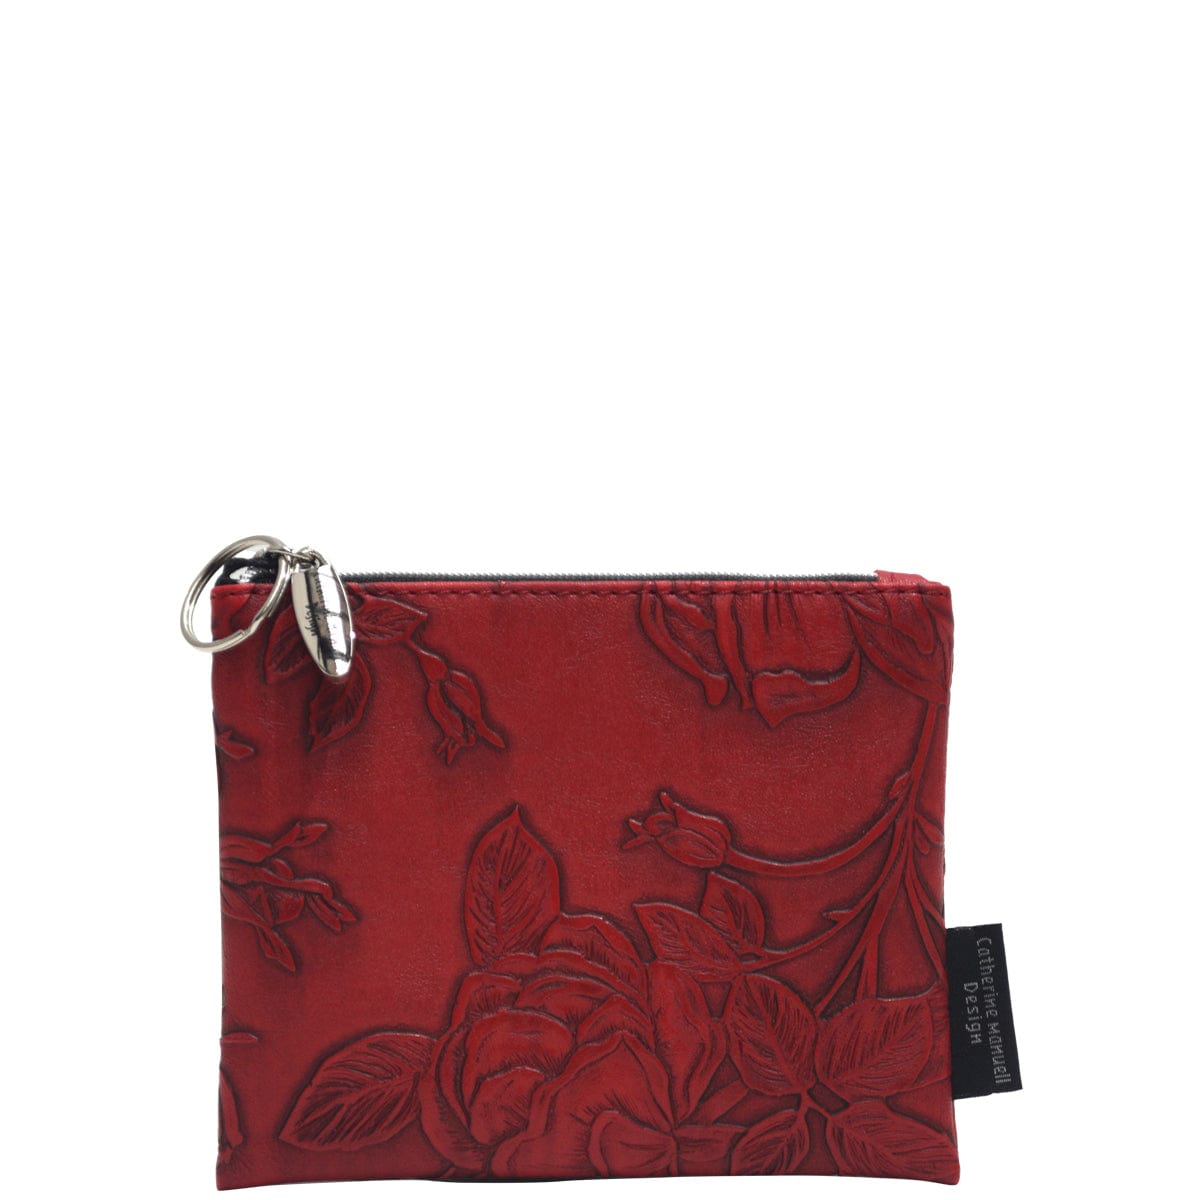 Everyday Purse - Red Emboss Rose - 20% off